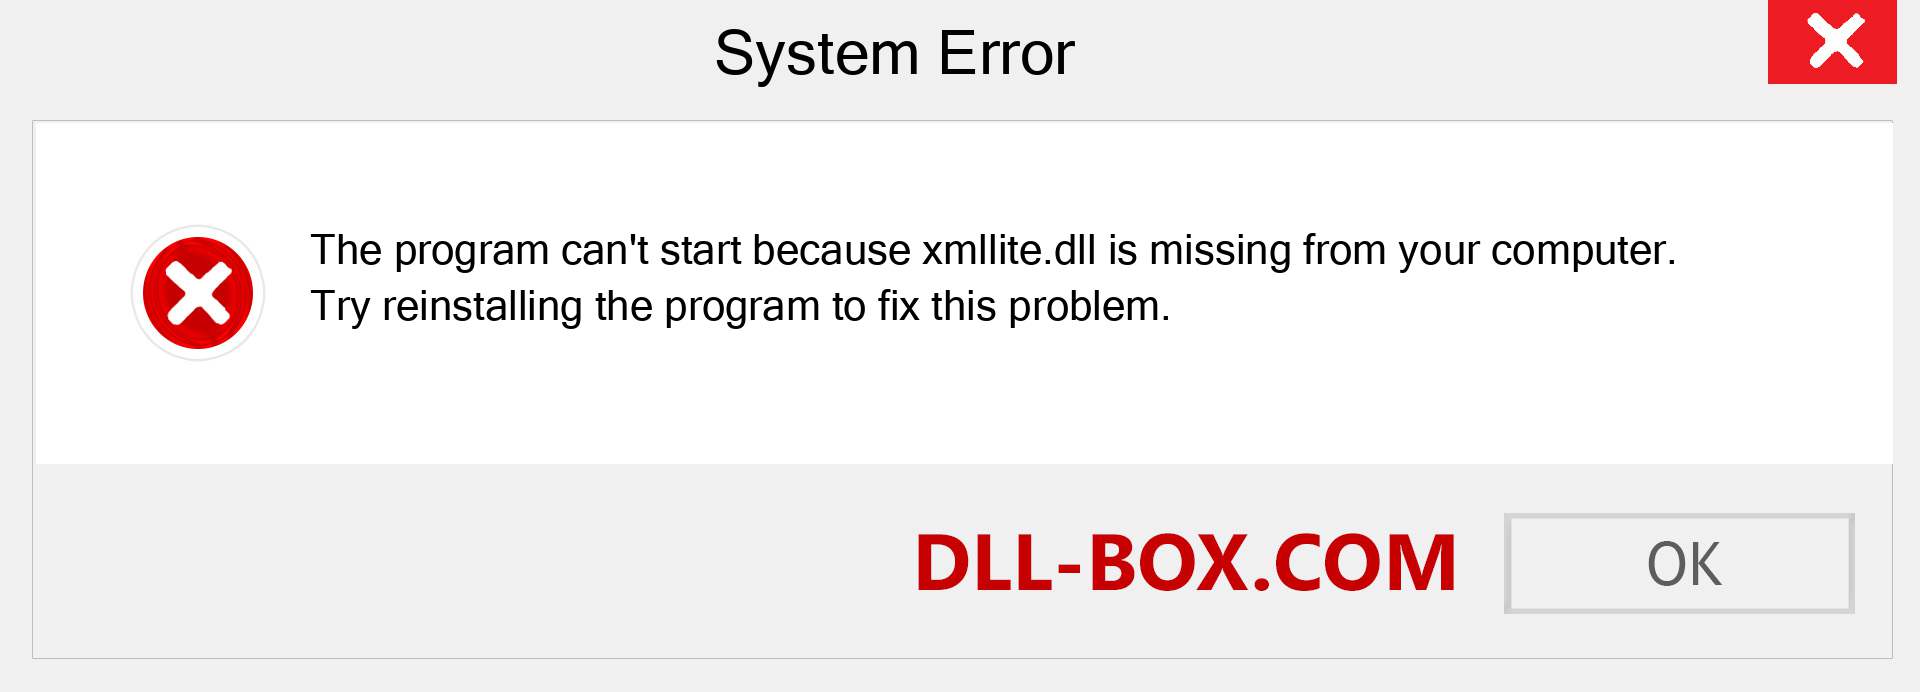  xmllite.dll file is missing?. Download for Windows 7, 8, 10 - Fix  xmllite dll Missing Error on Windows, photos, images